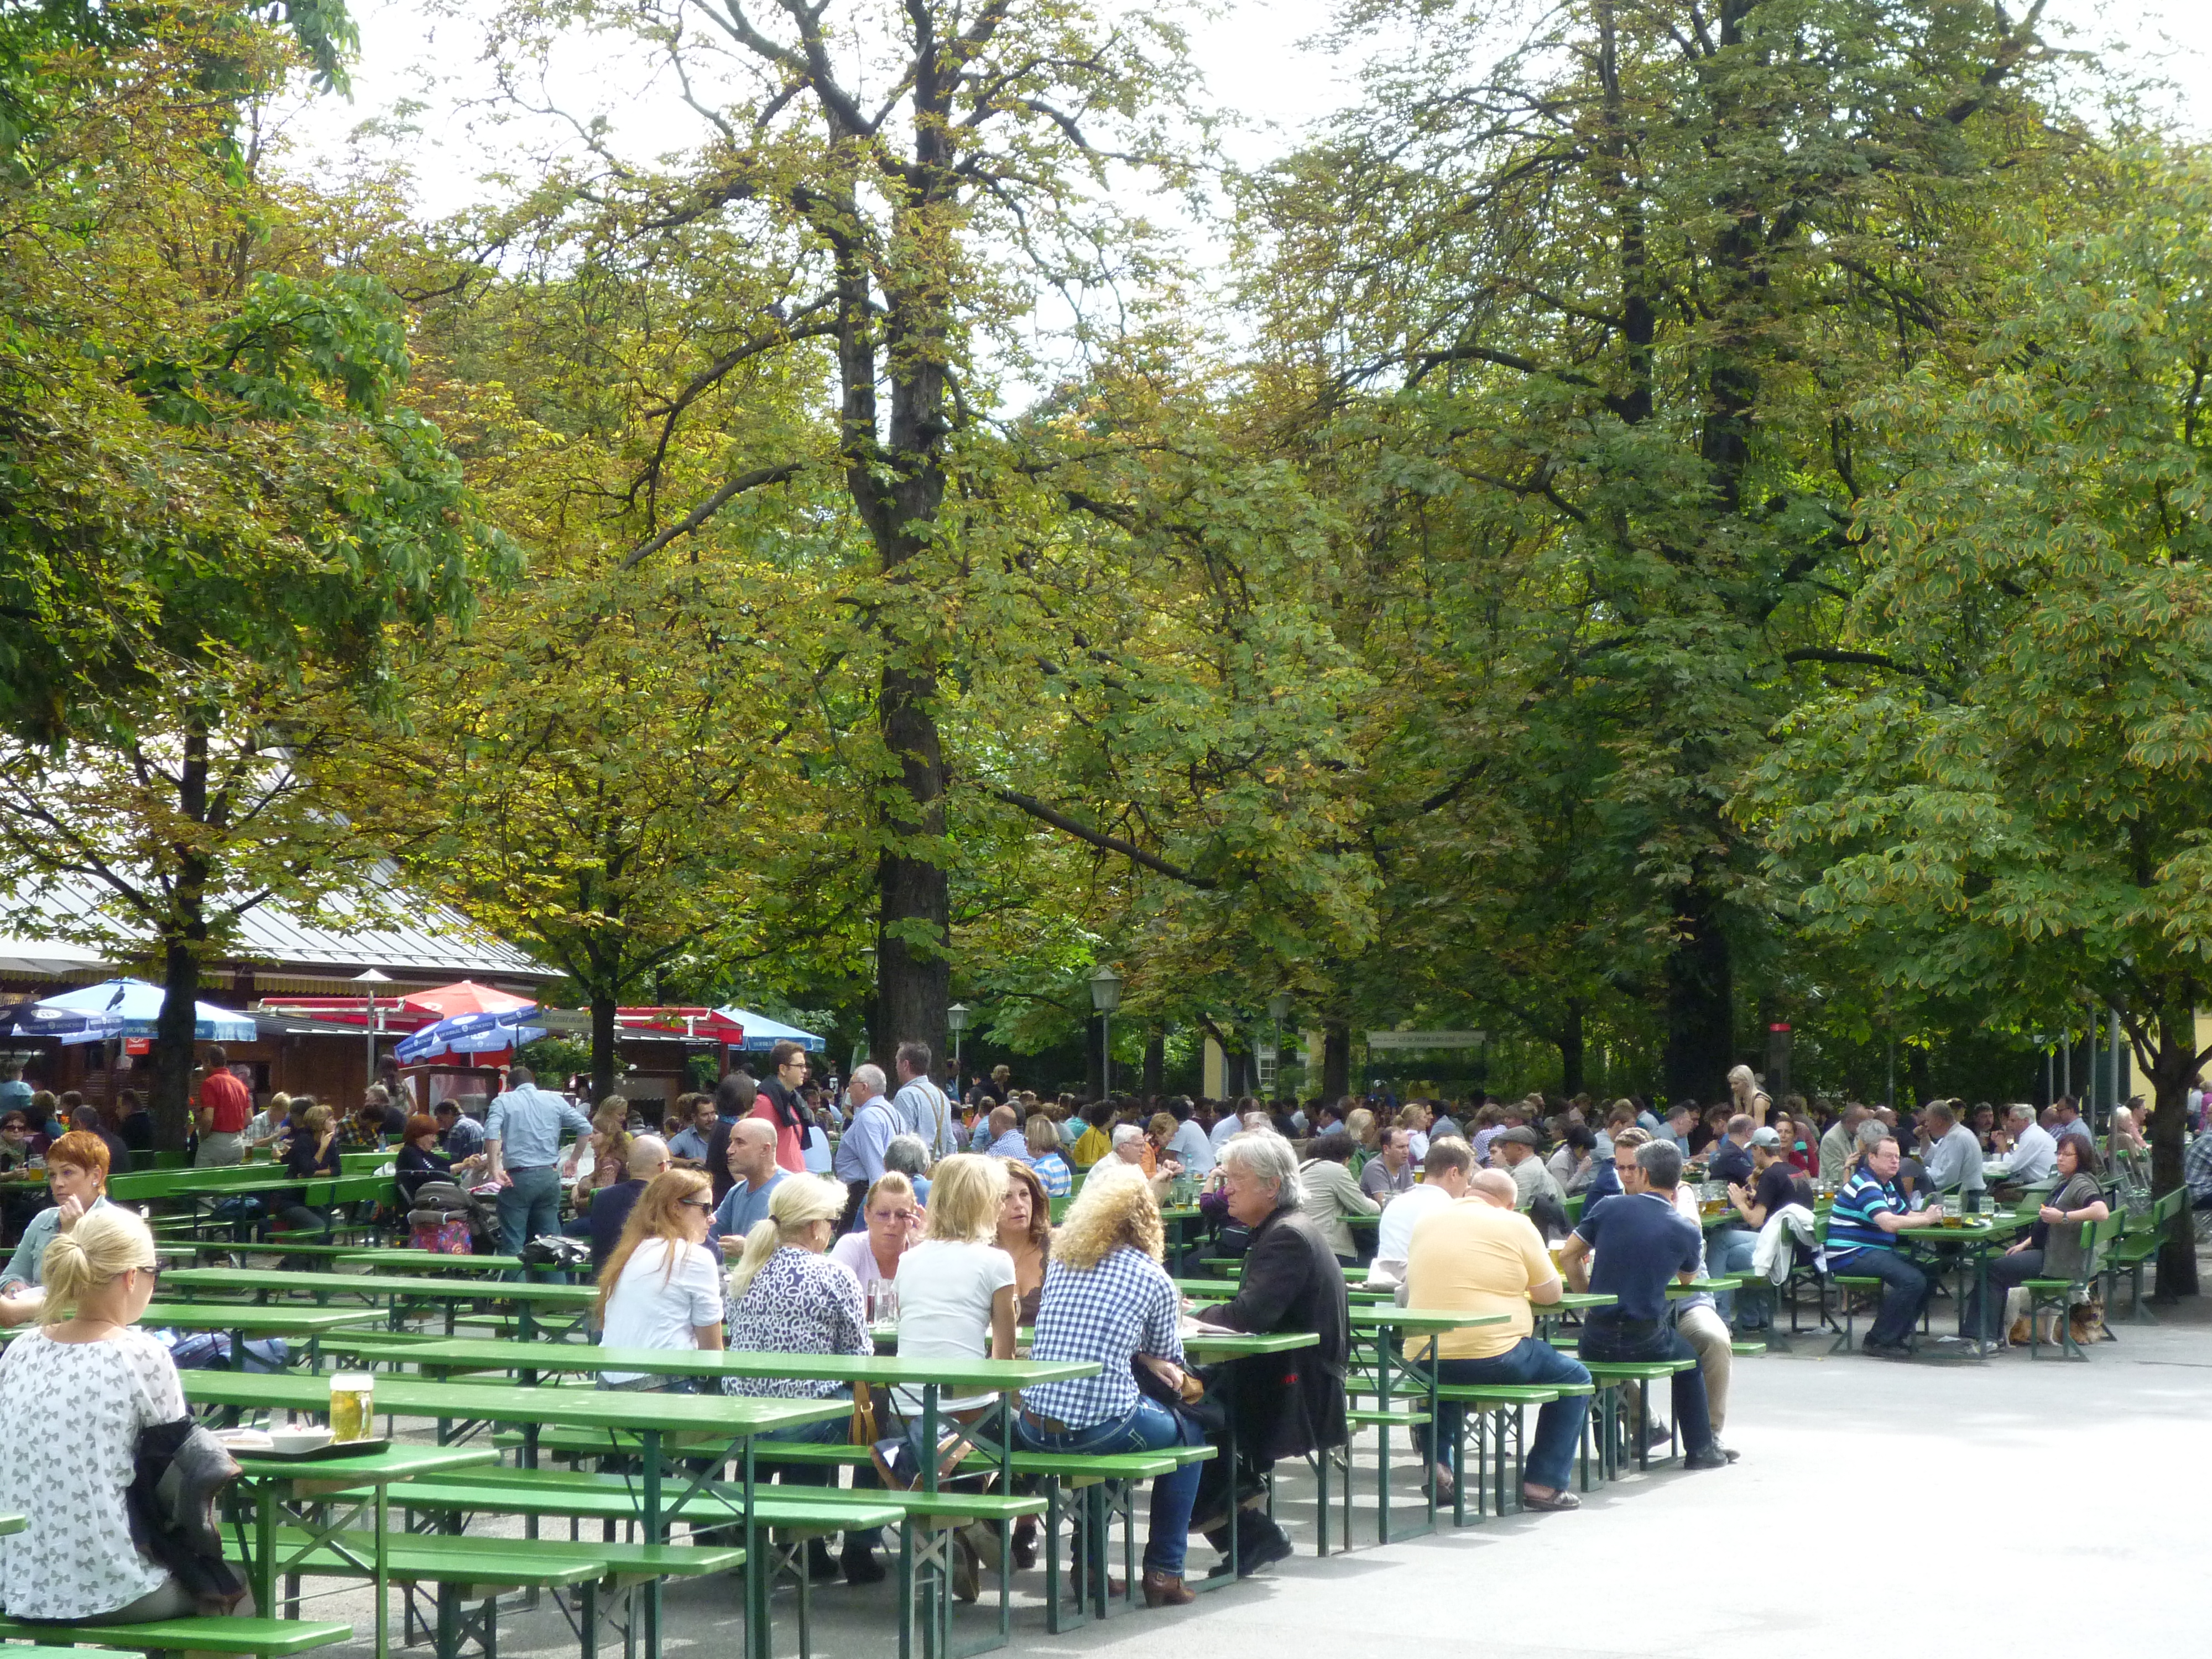 A Londoner from Afar Goes to Munich - The Chinese Tower and Beer Garden